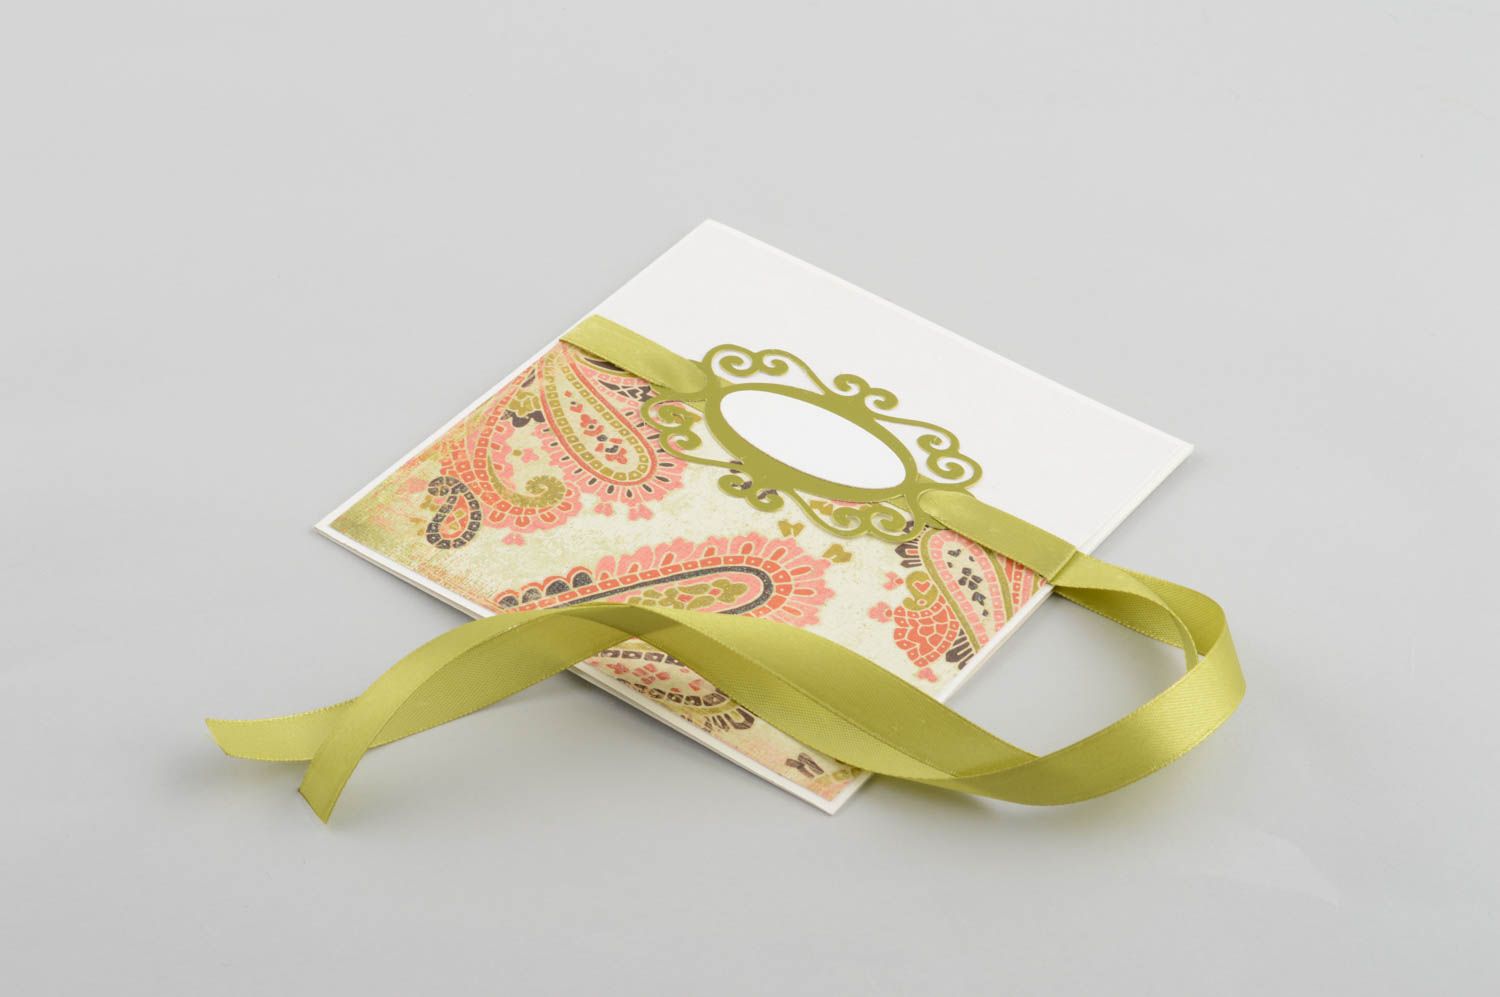 Handmade tender present unusual stylish envelope cute wrapping for disc photo 3